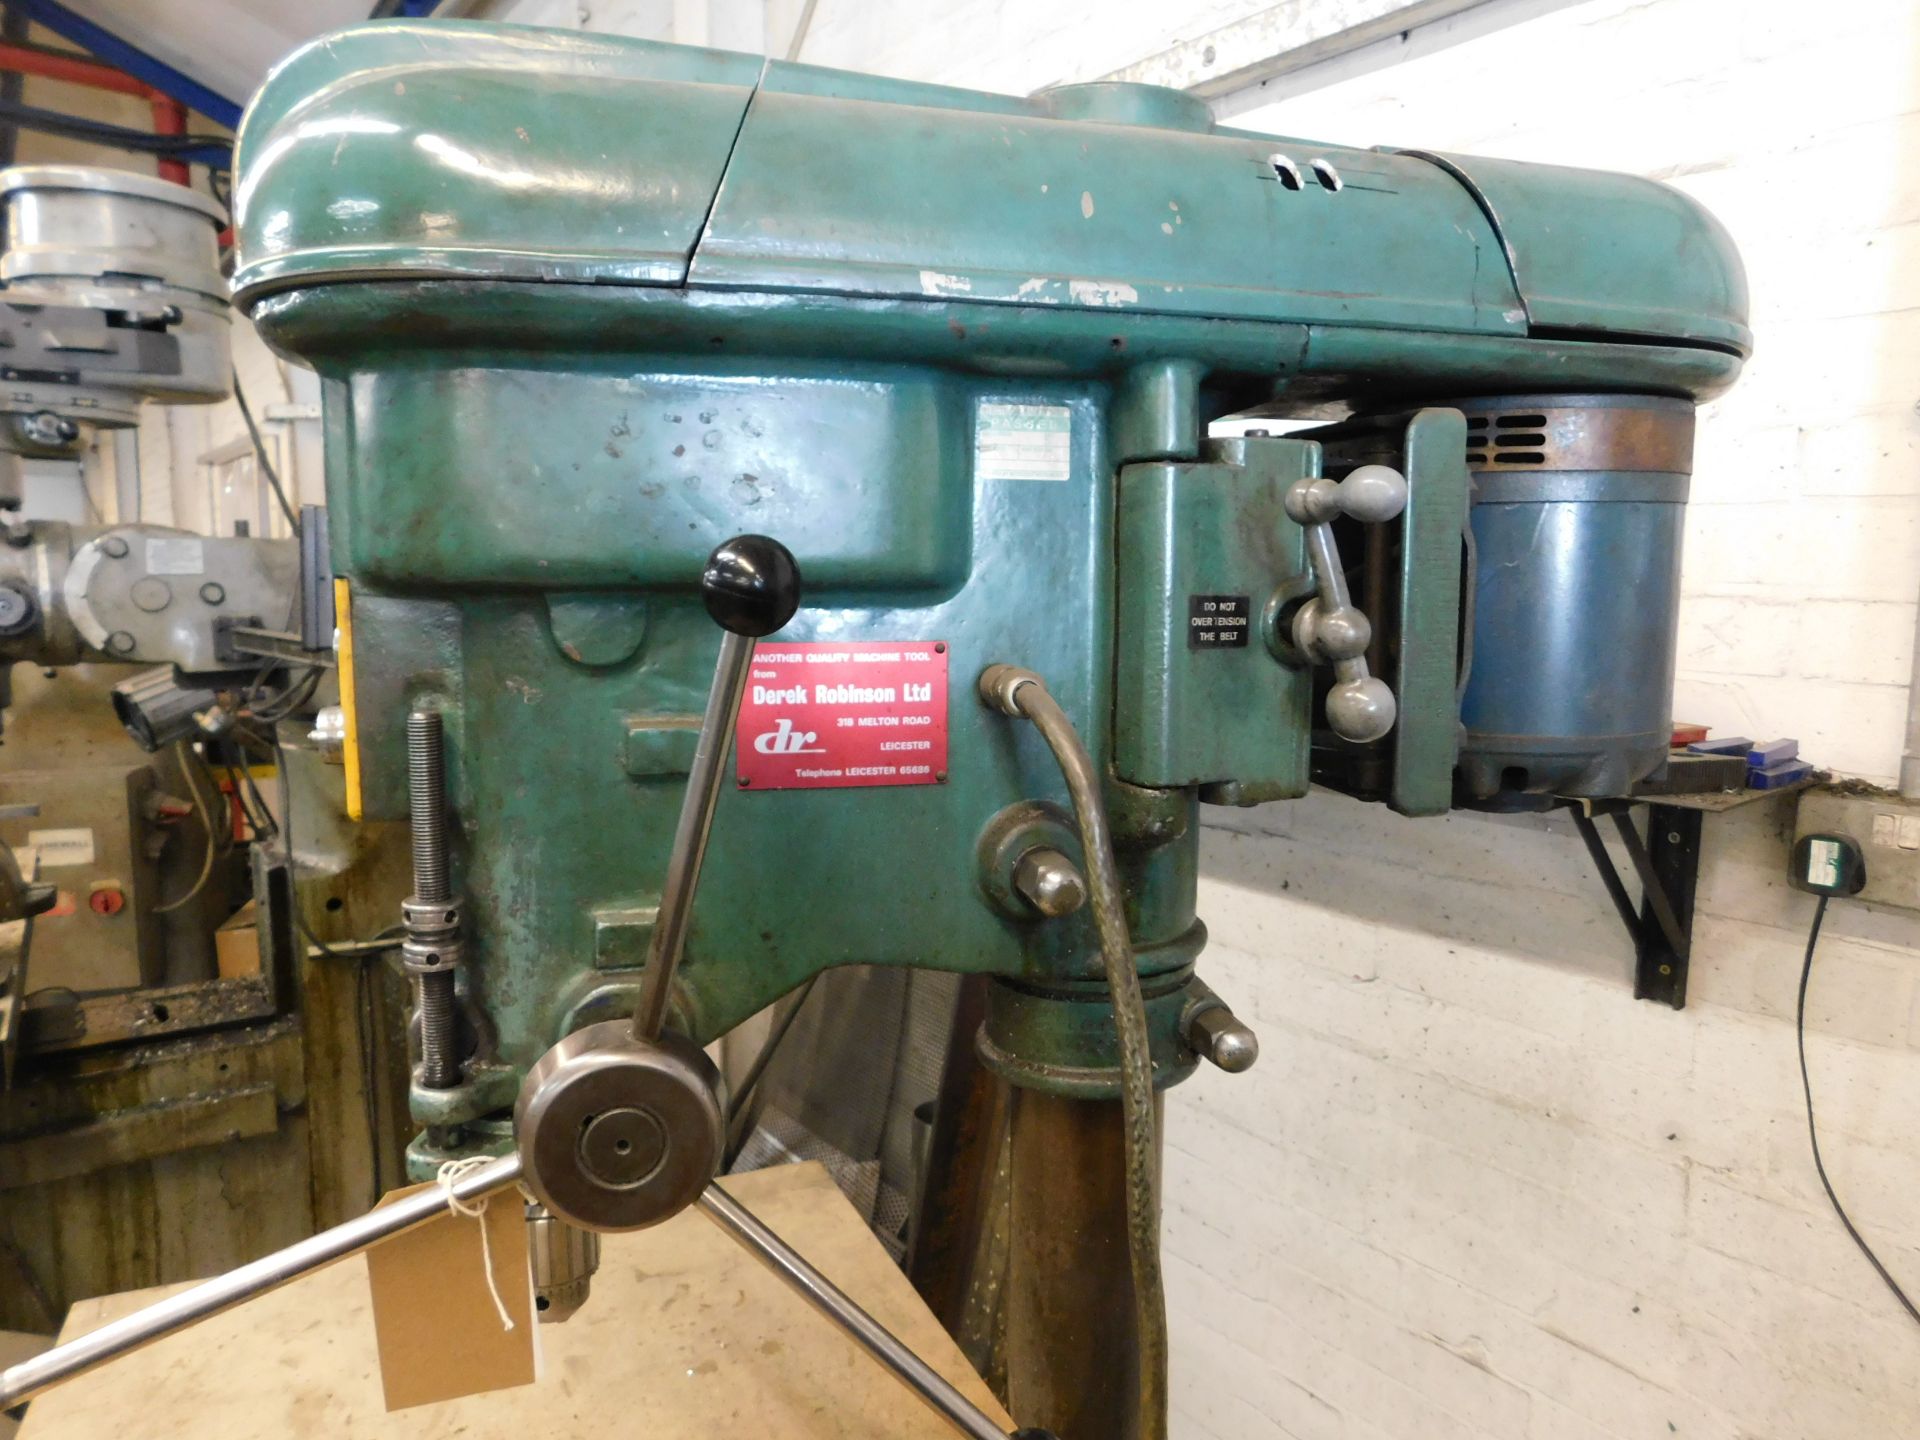 Fobco 7-Speed Pedestal Drill, Serial Number SMX781J159, 3-Phase (Location: Kettering - See General - Image 2 of 3